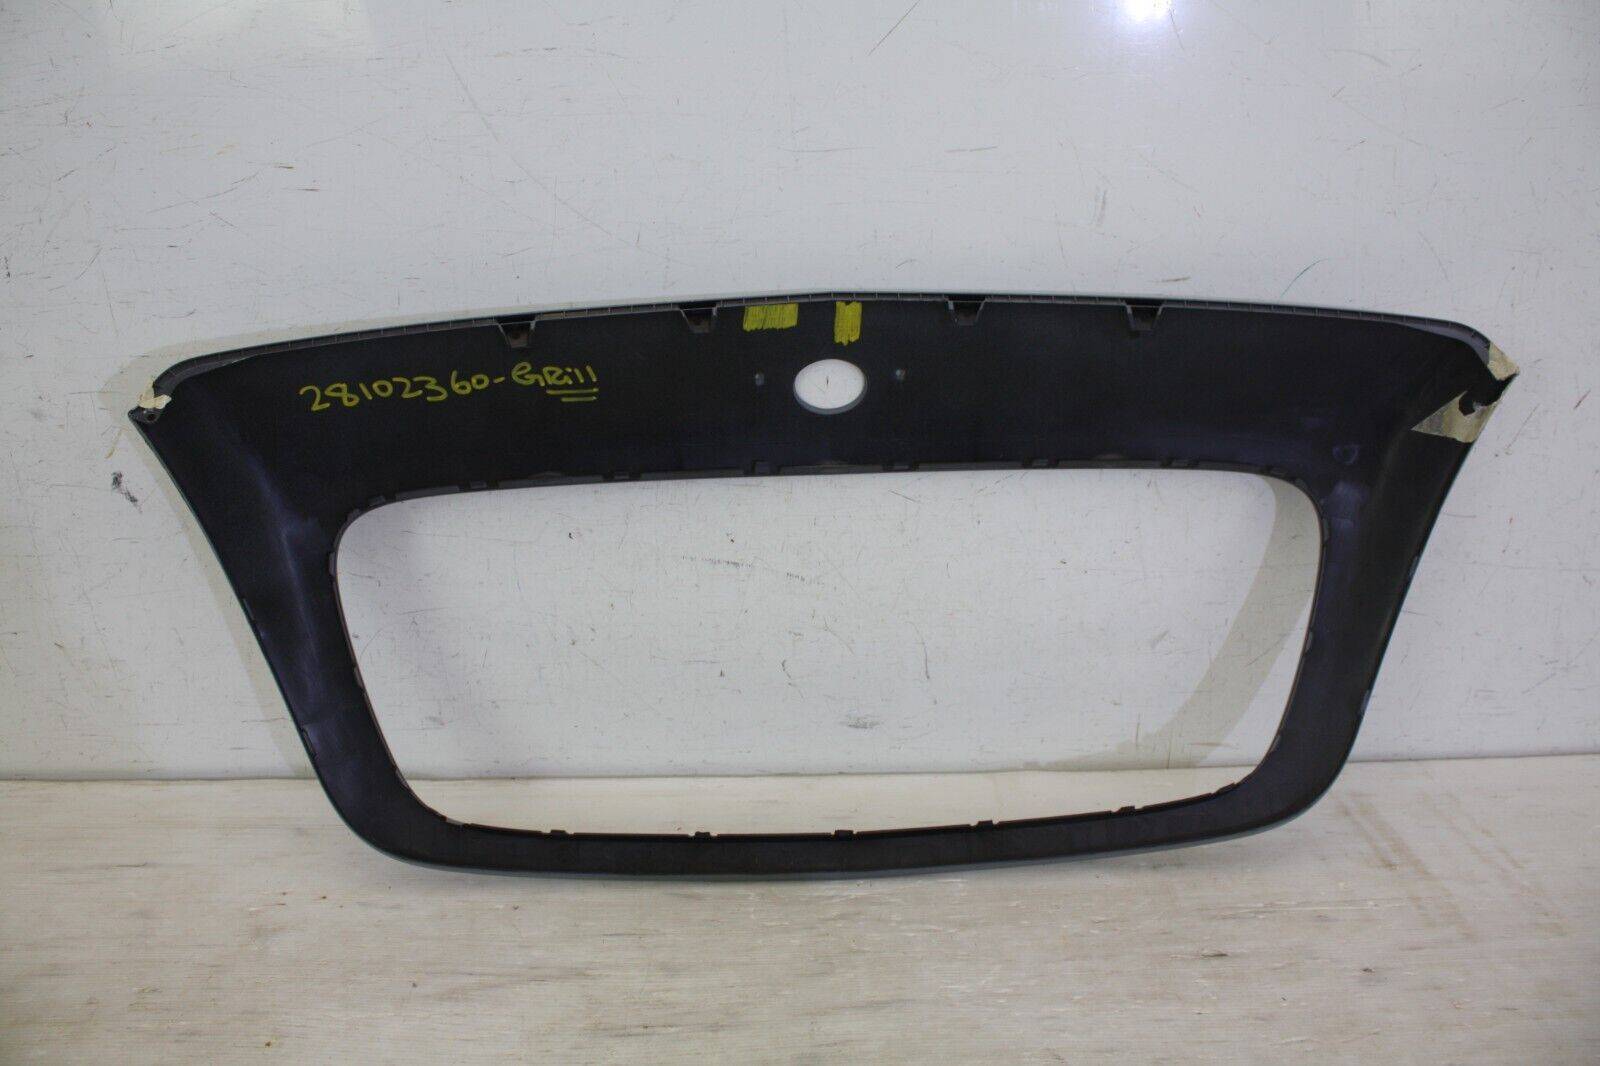 Bentley-Continental-Flying-Spur-GT-GTC-Front-Grill-Surround-3W0853653C-Genuine-175996126656-15